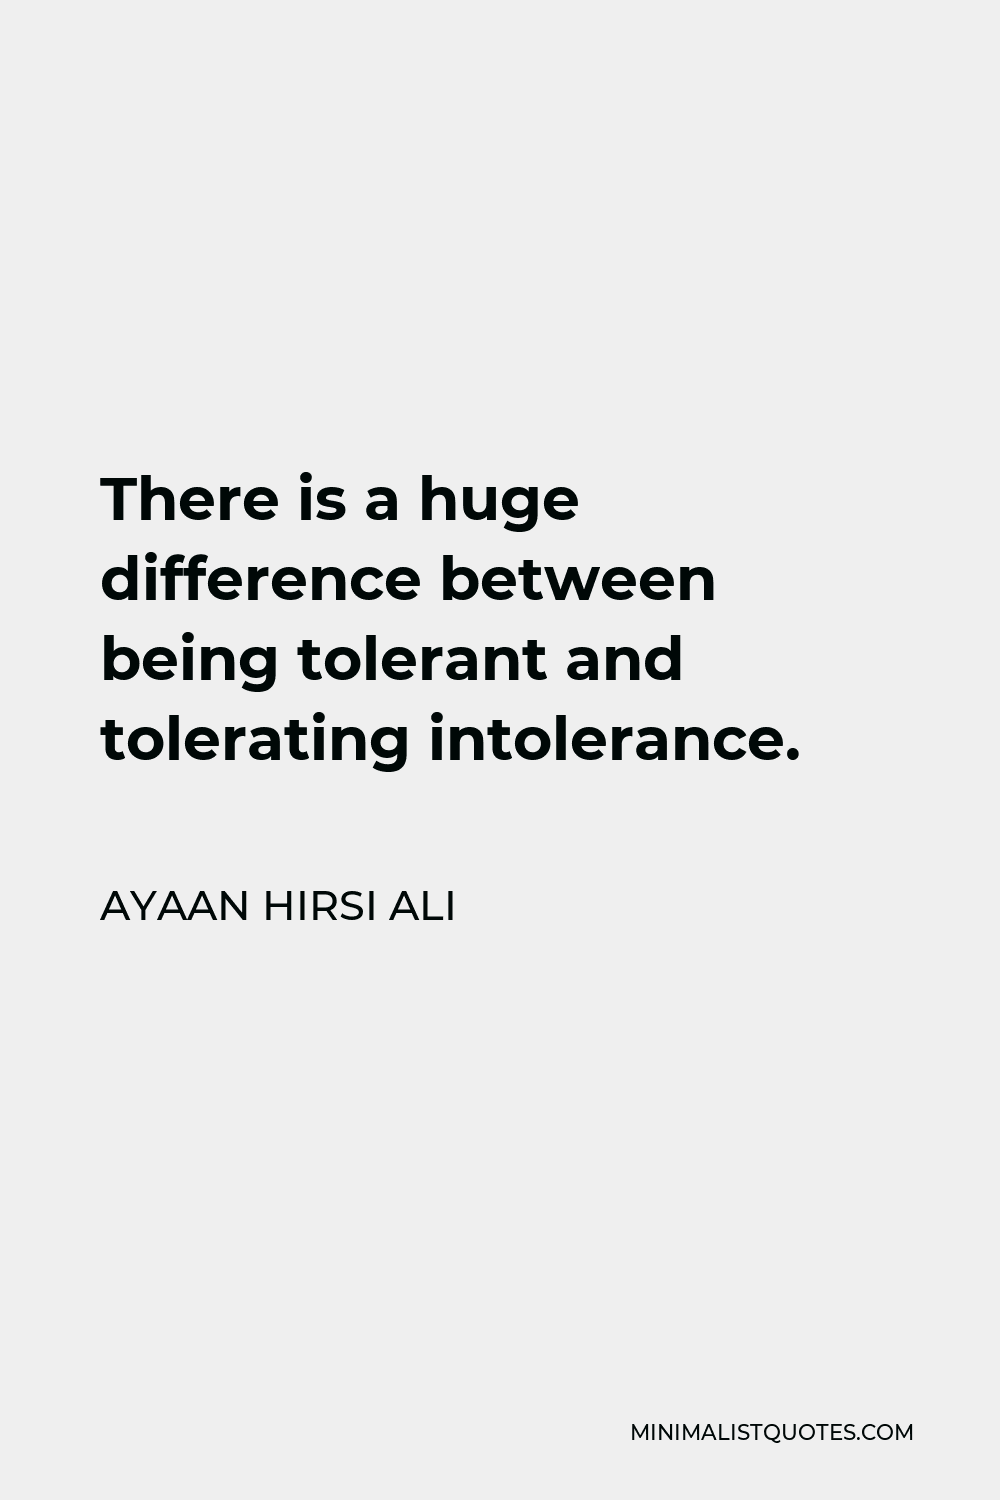 Ayaan Hirsi Ali Quote - There is a huge difference between being tolerant and tolerating intolerance.